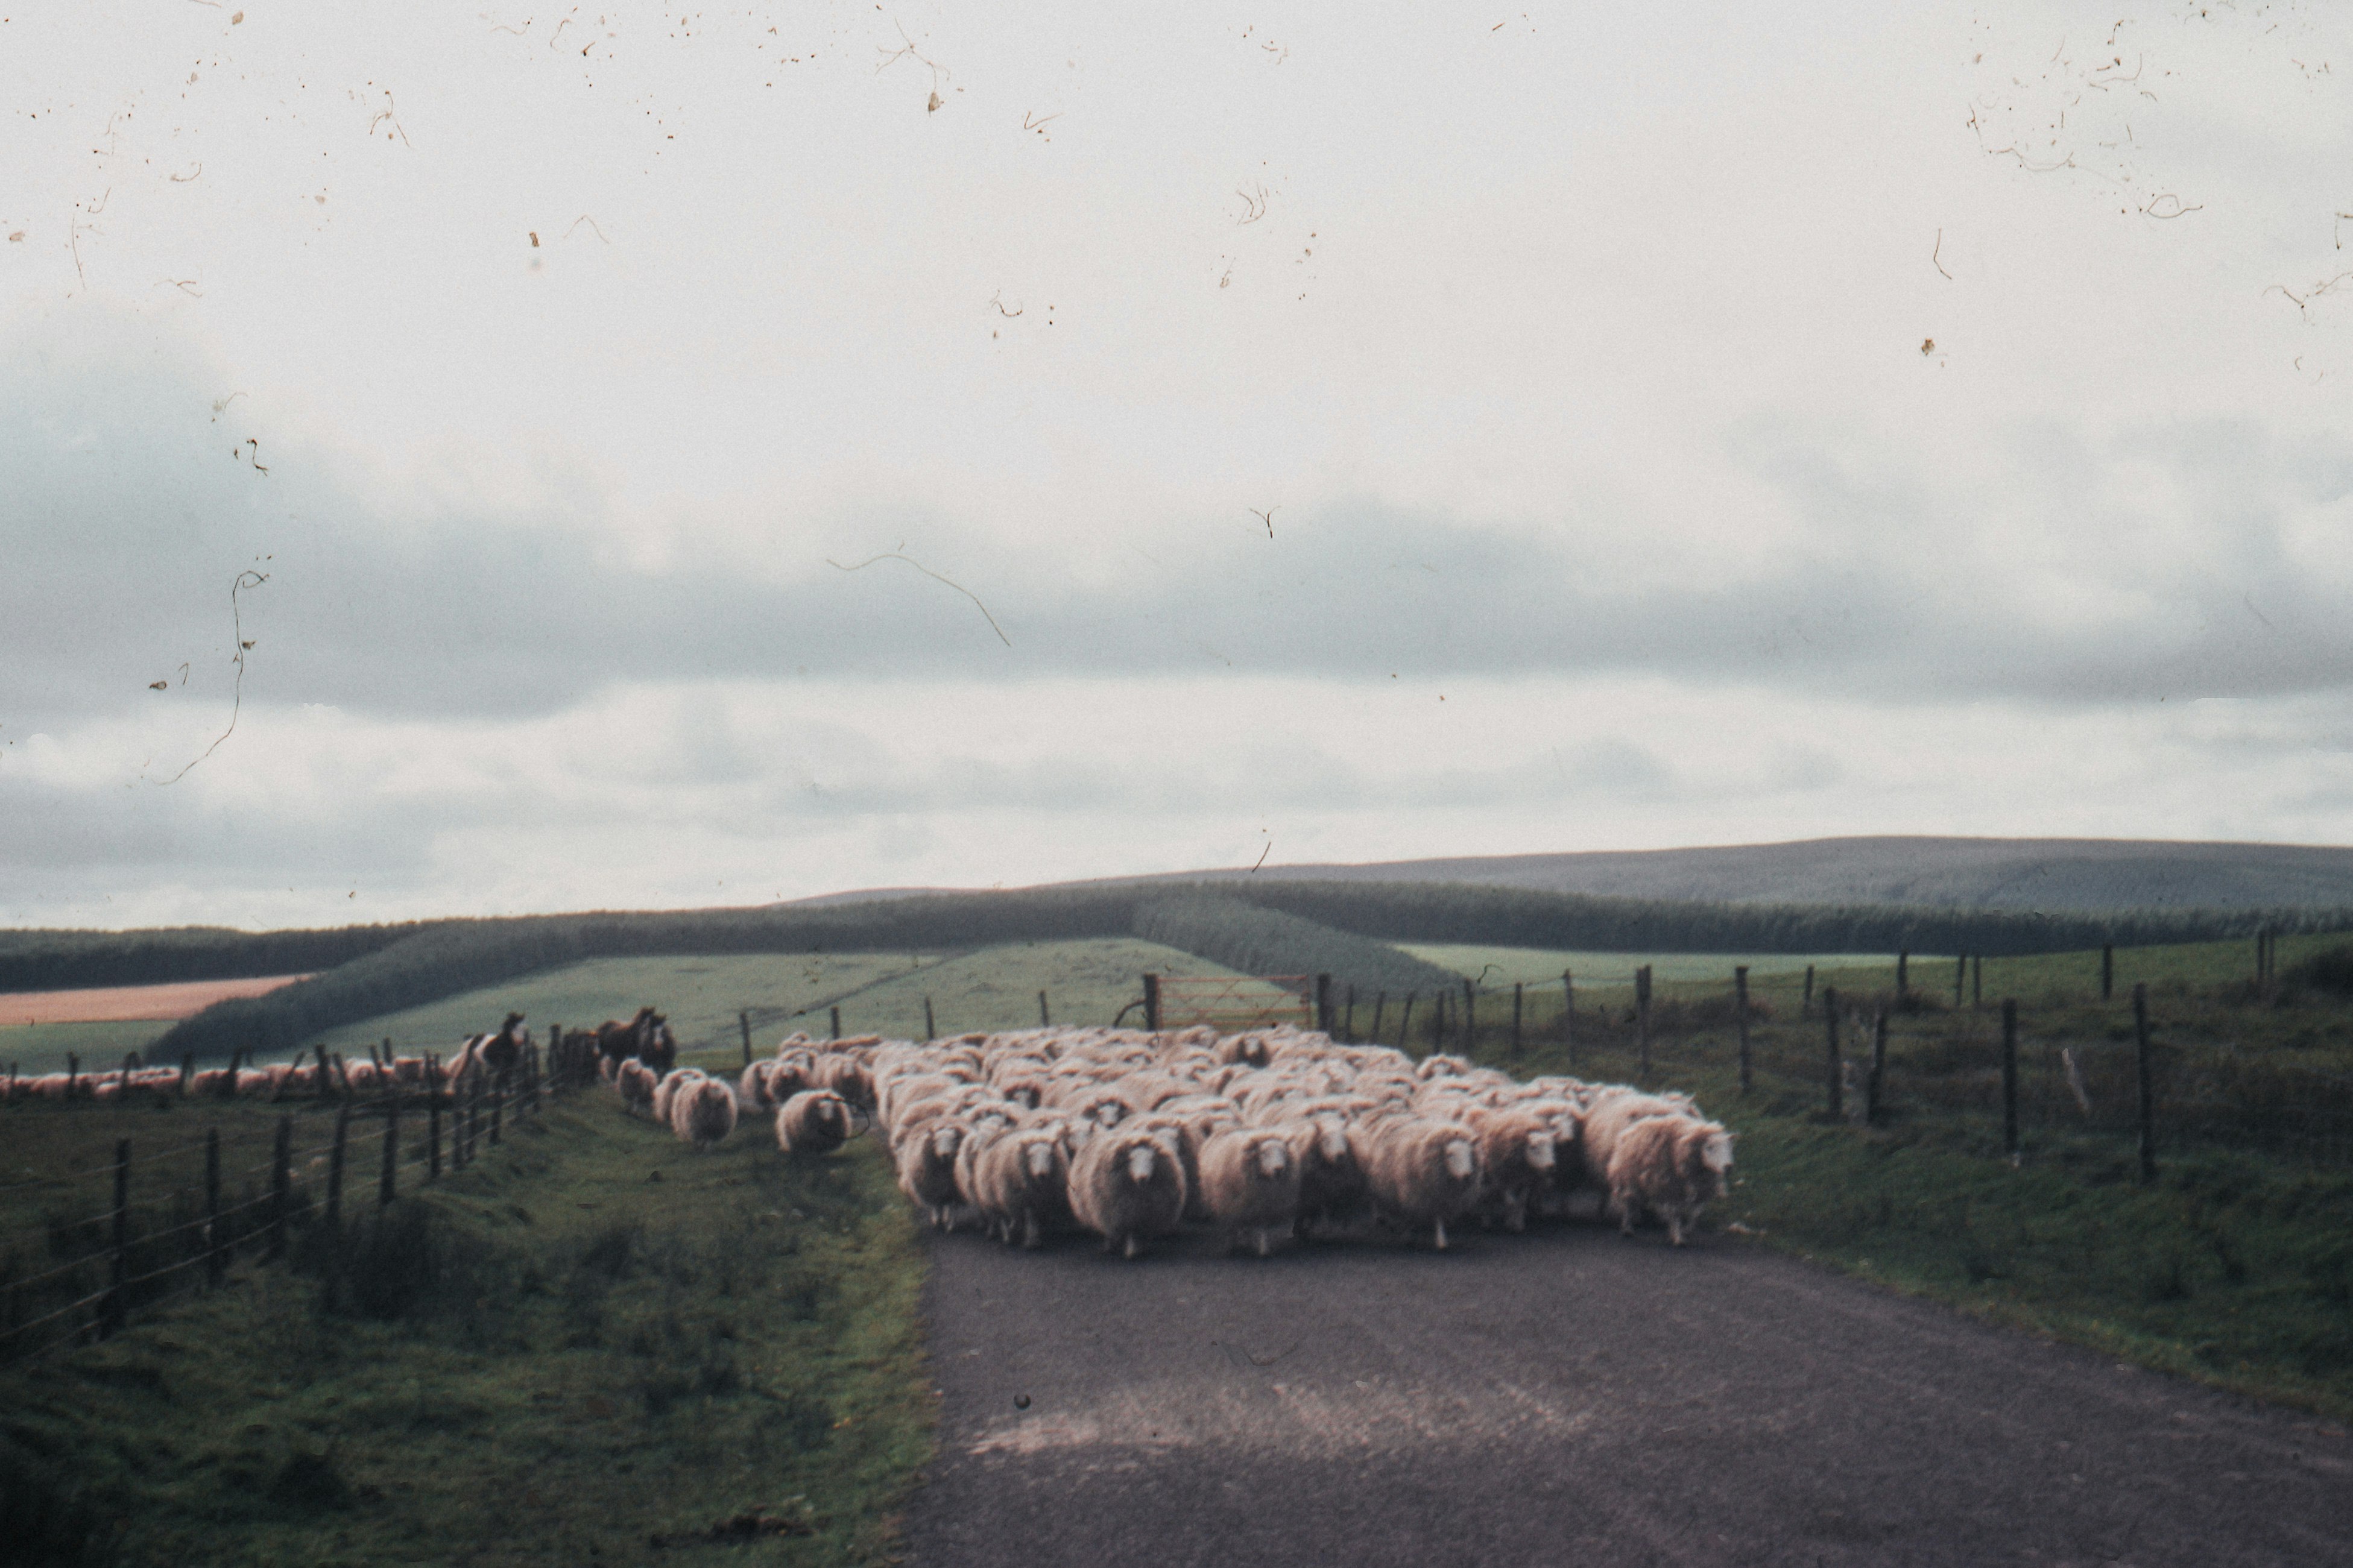 herd of sheep near fence